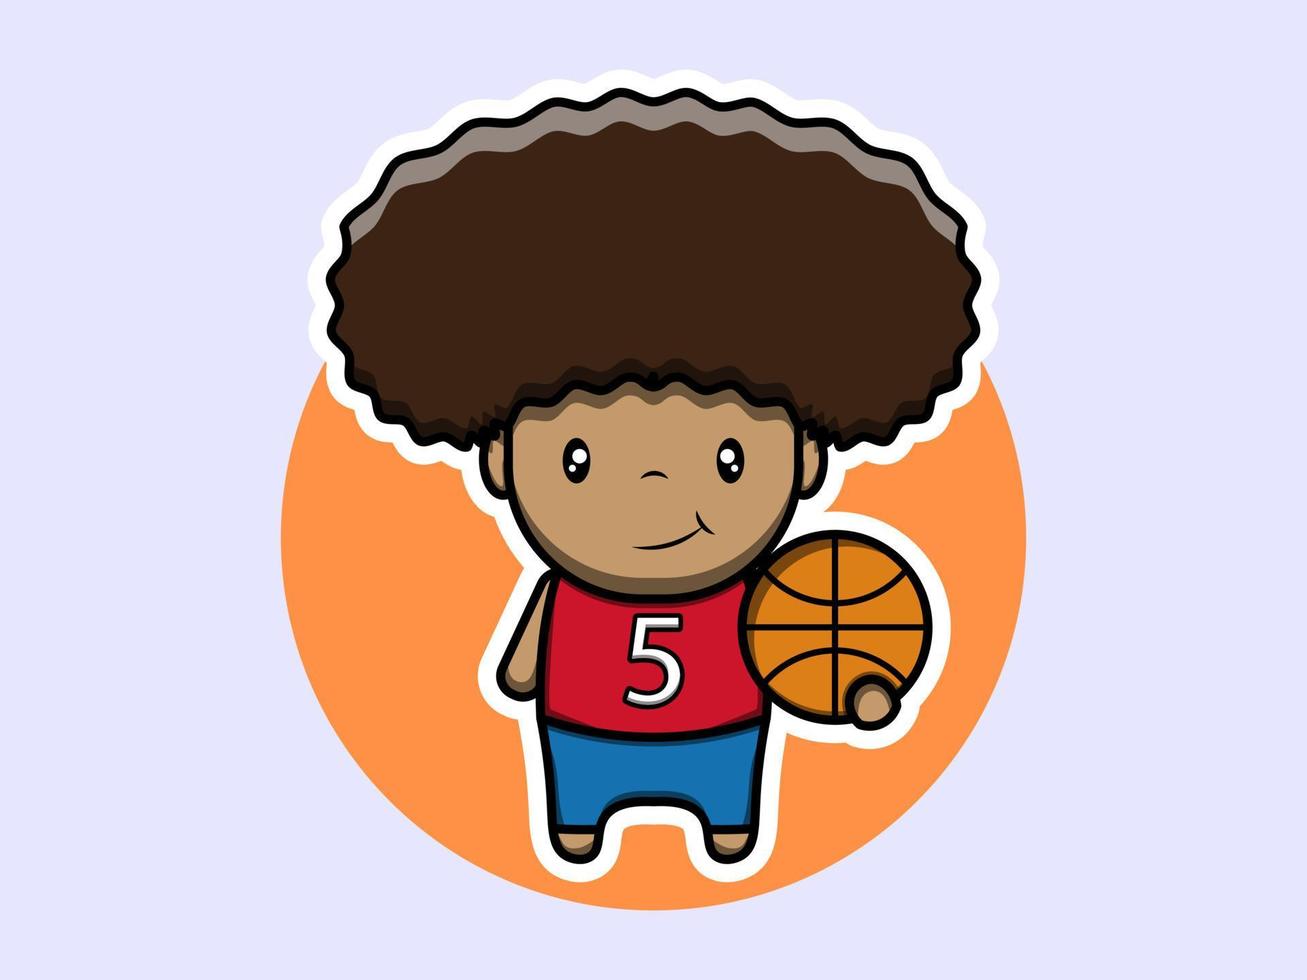 Cute basketball player character vector icon illustration. Isolated flat design.